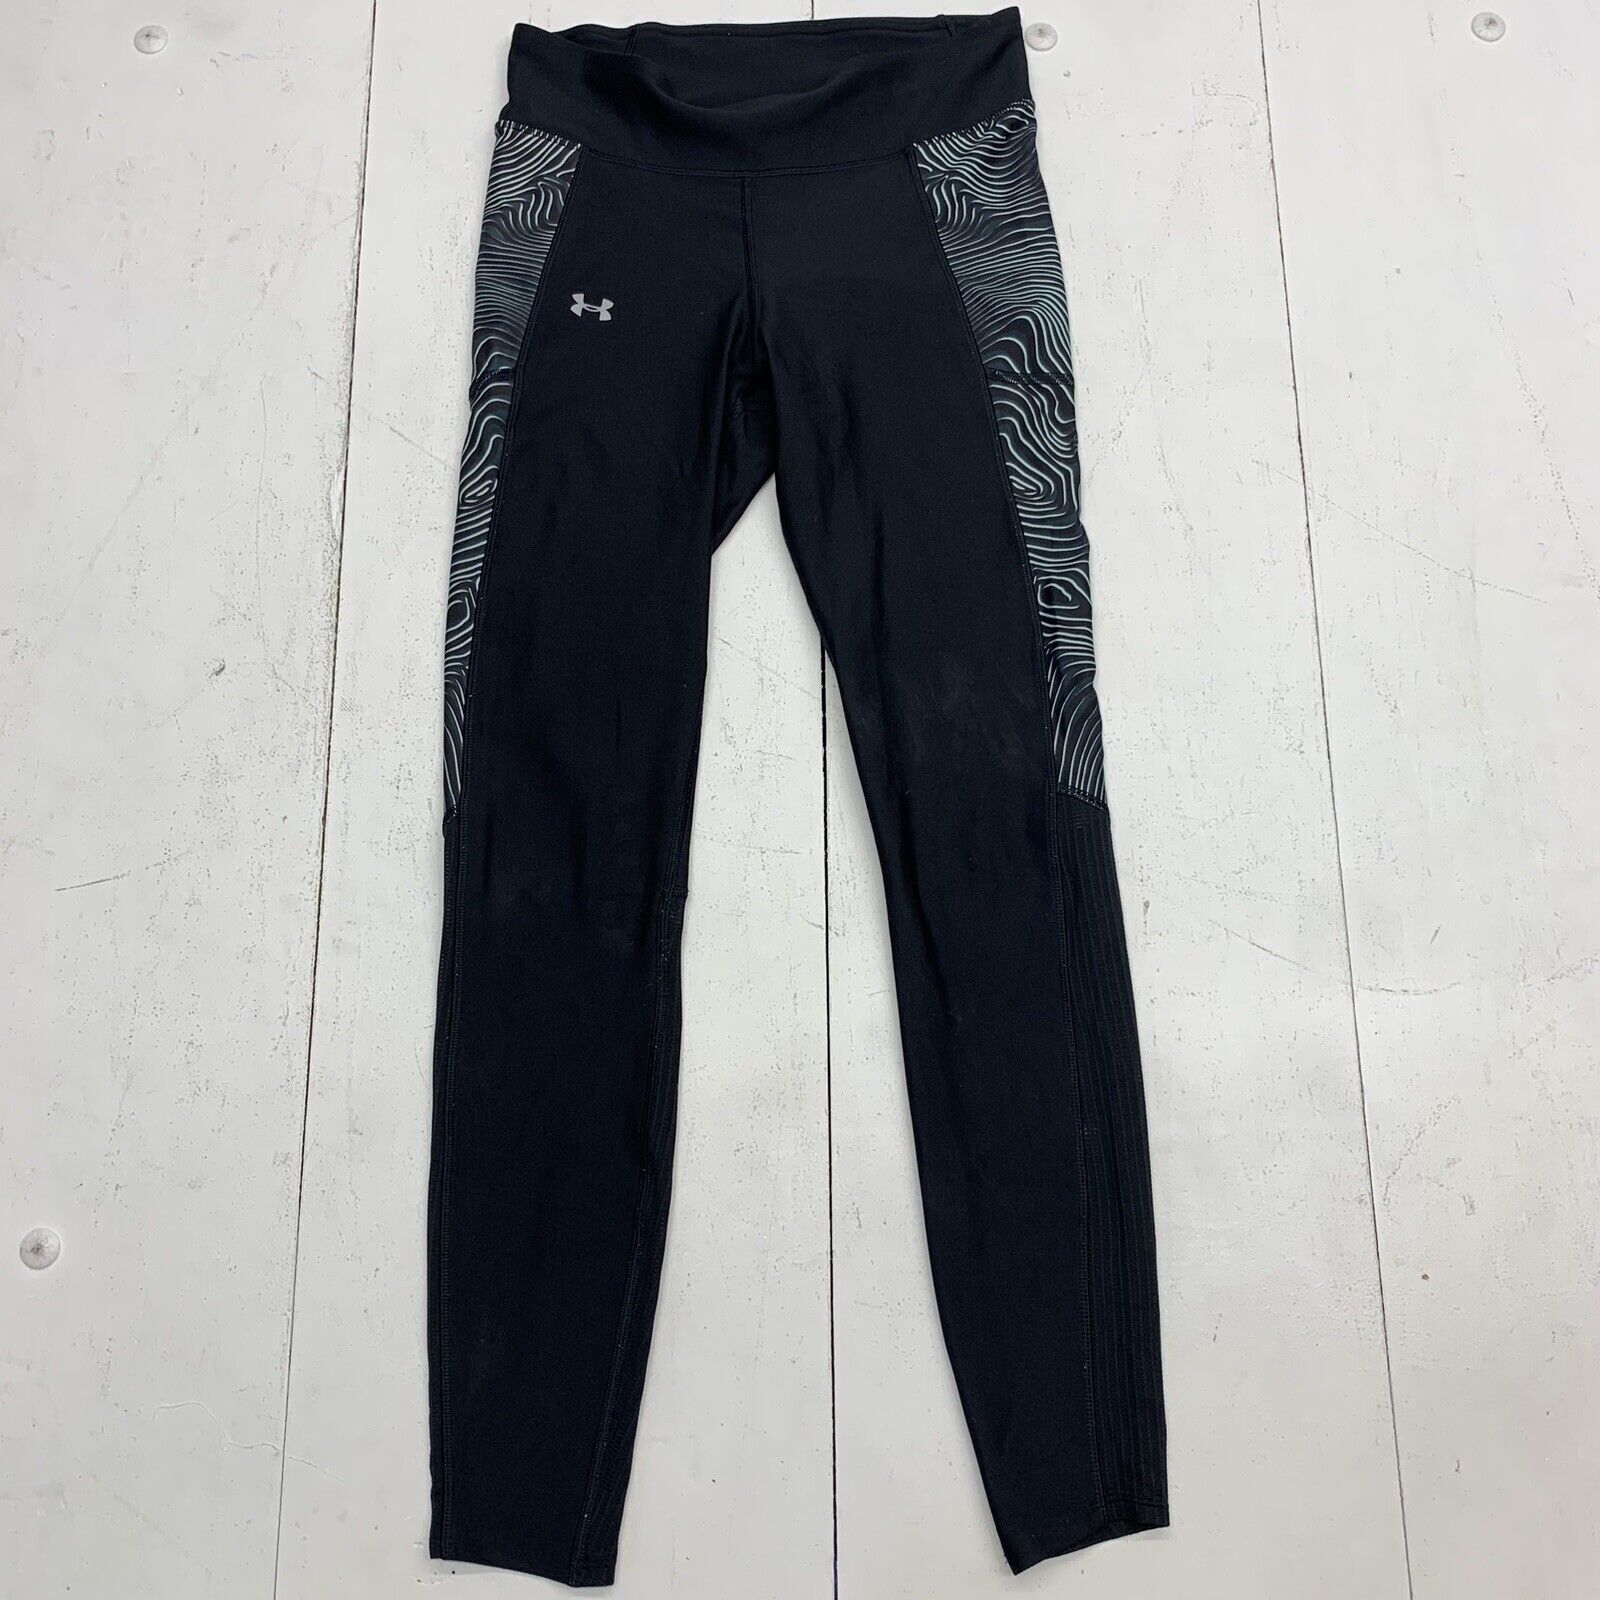 Under Armour Womens Black athletic leggings size small - beyond